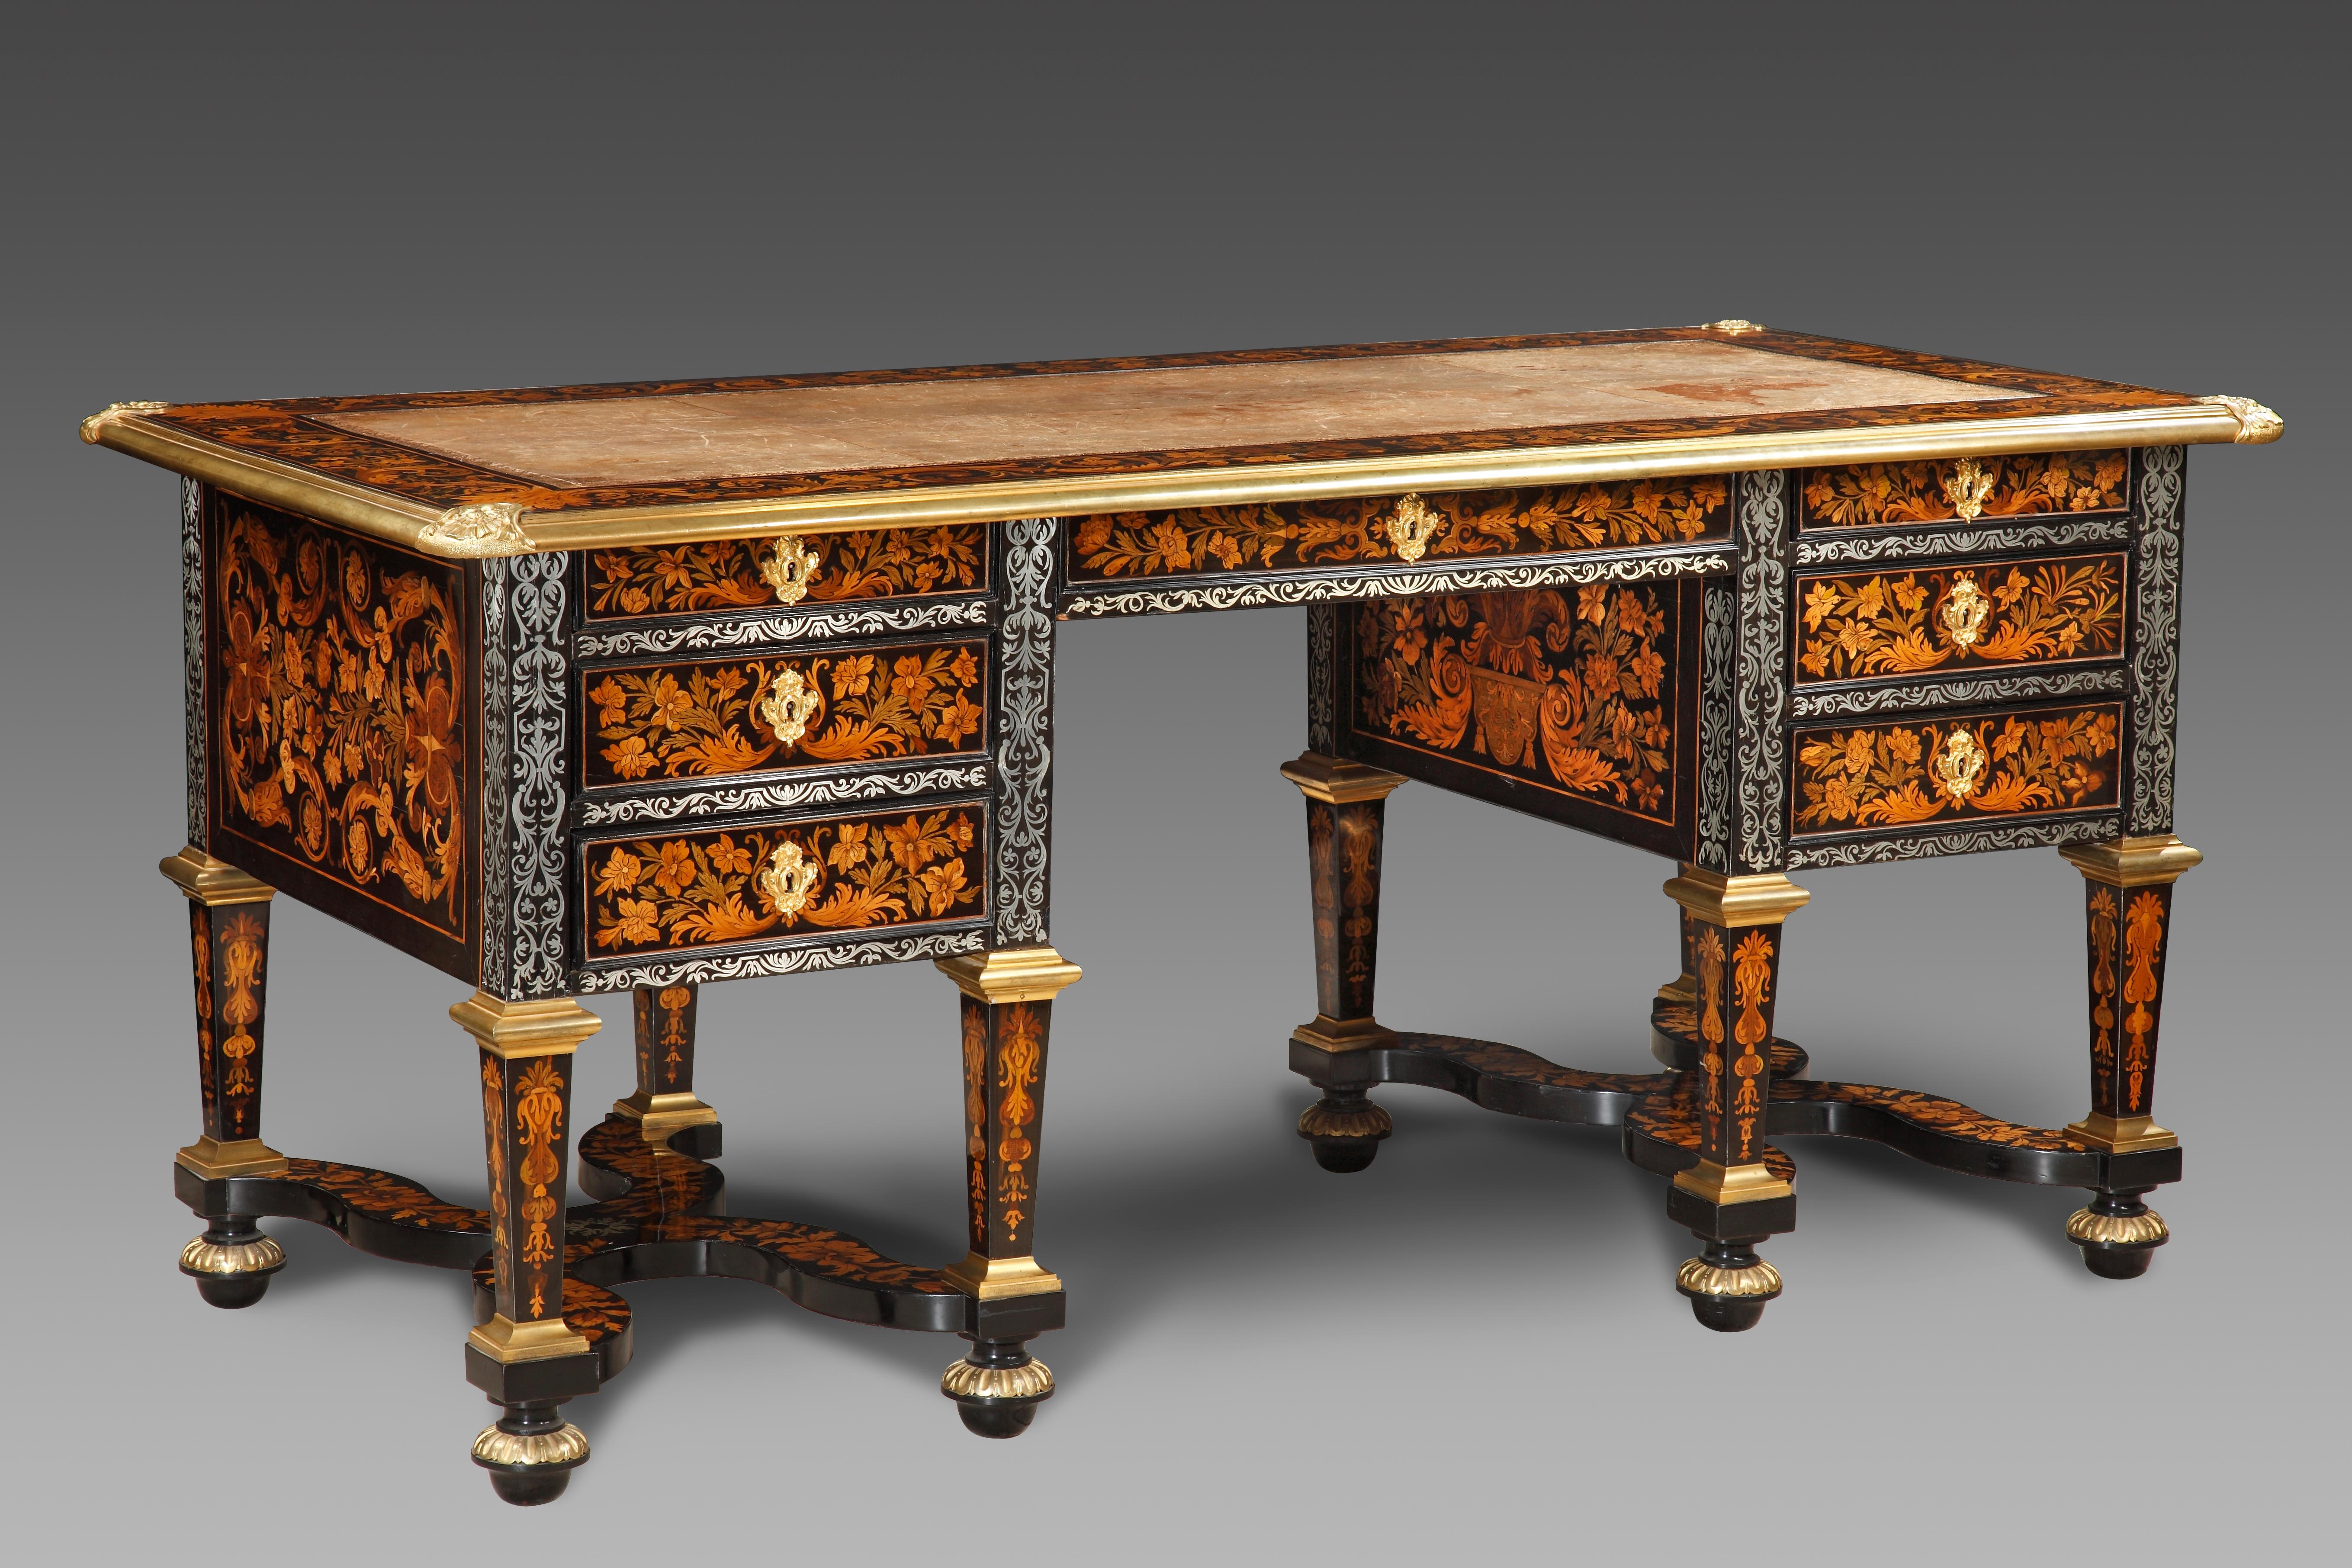 A rare French Louis XIV large pewter and fruitwood inlaid marquetry  desk called “bureau Mazarin” attributed to Pierre Gole (1620 – 1684)
Dimensions : h. 32.68 in, w. 70.8 in, d. 35.43 in.
Late 17th century 
This unusually large rectangular desk is